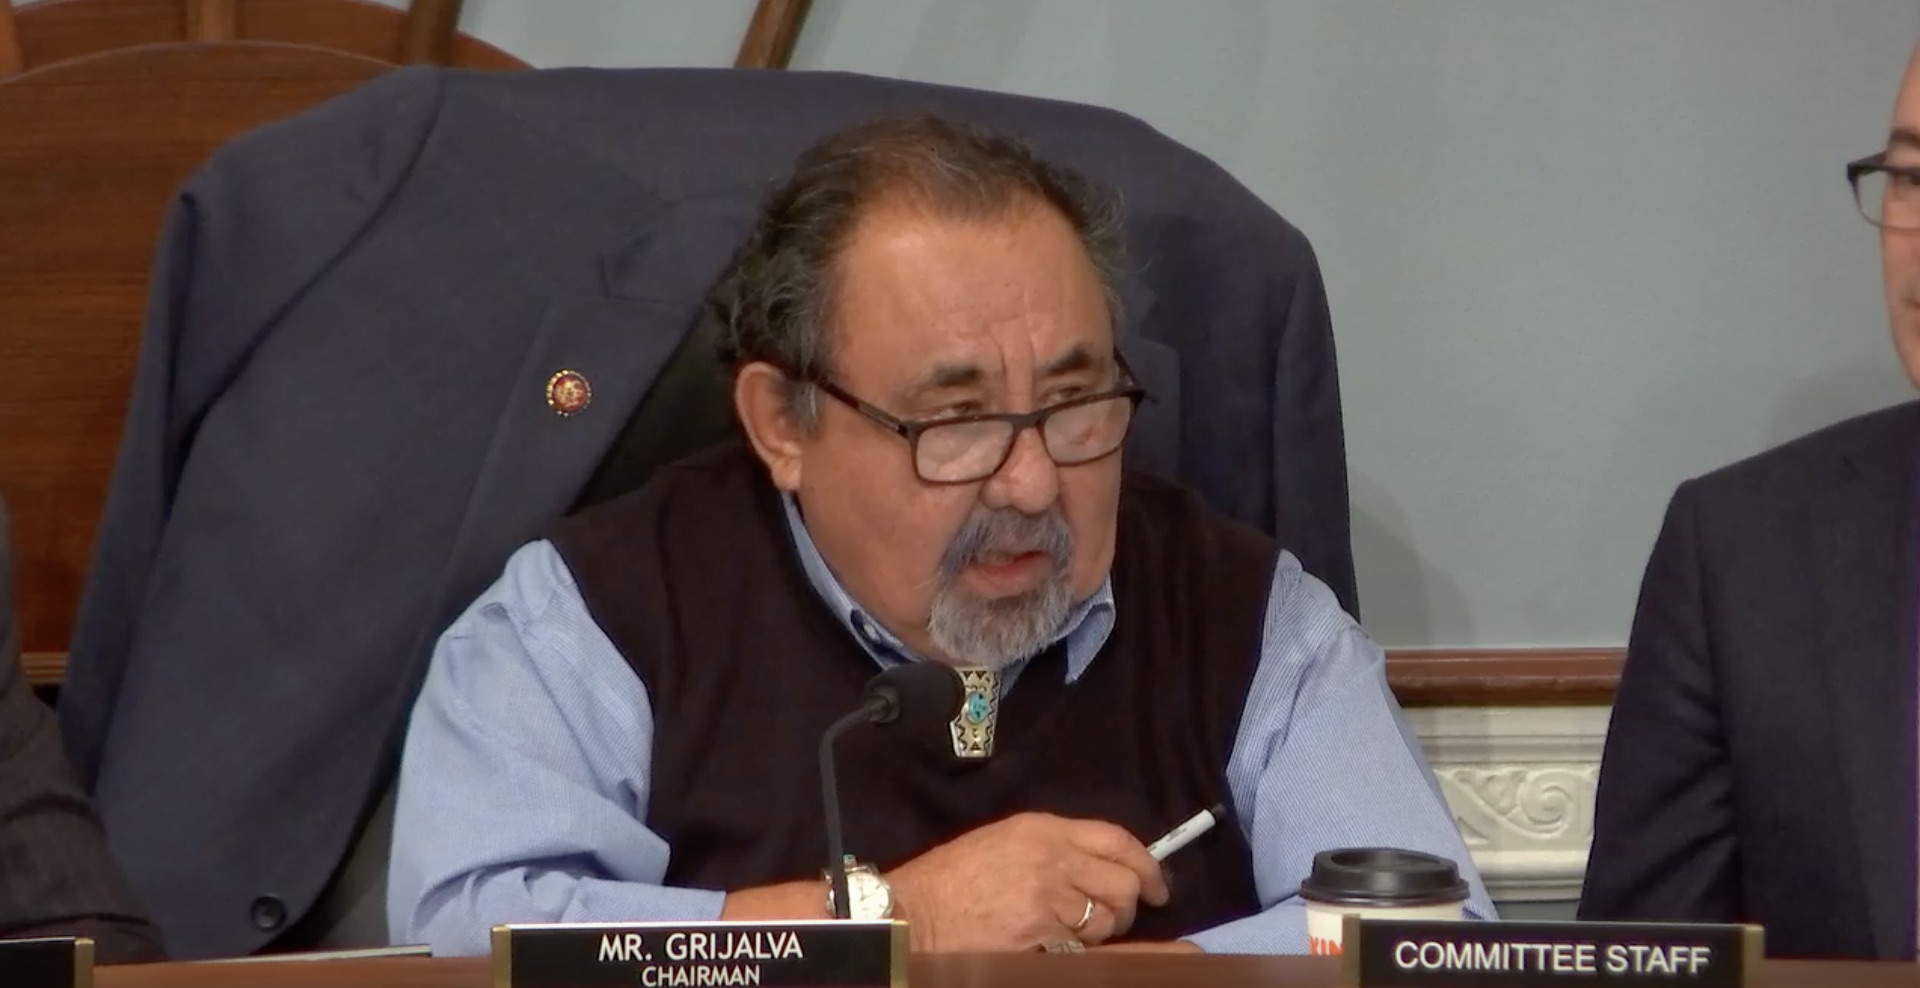 Democrat Rep. Raul Grijalva at a Natural Resources Committee Hearing on climate change on Feb. 6, 2019. (YouTube/Screenshot/Climate Change: The Impacts and the Need to Act)